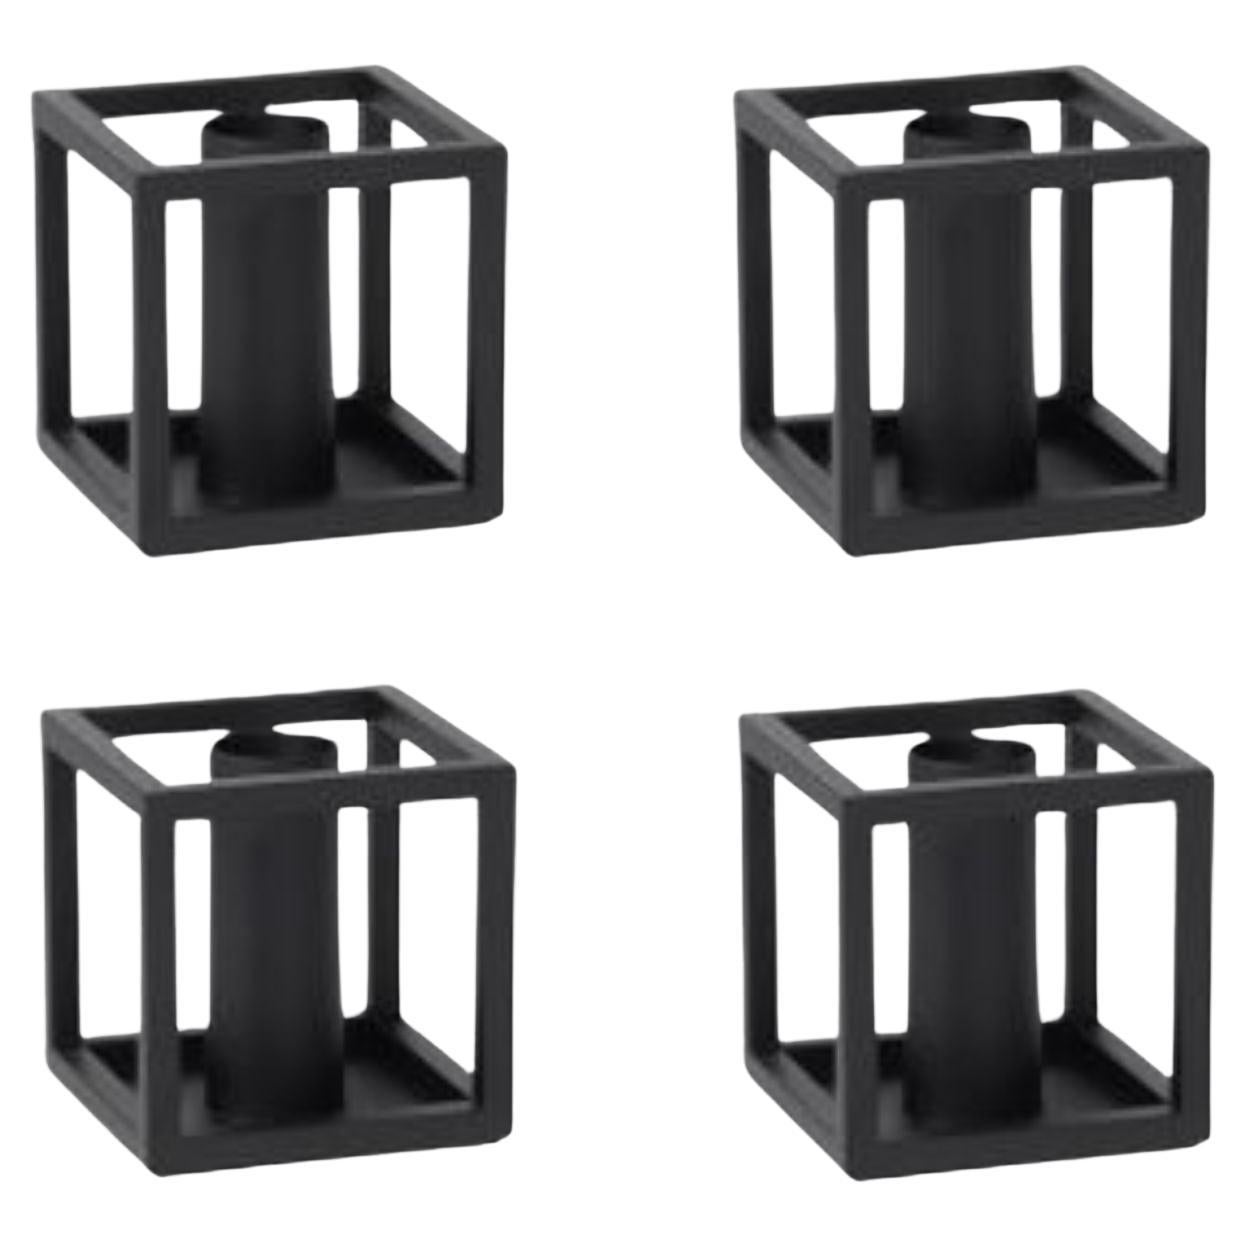 Set of 4 Black Kubus 1 Candle Holders by Lassen For Sale